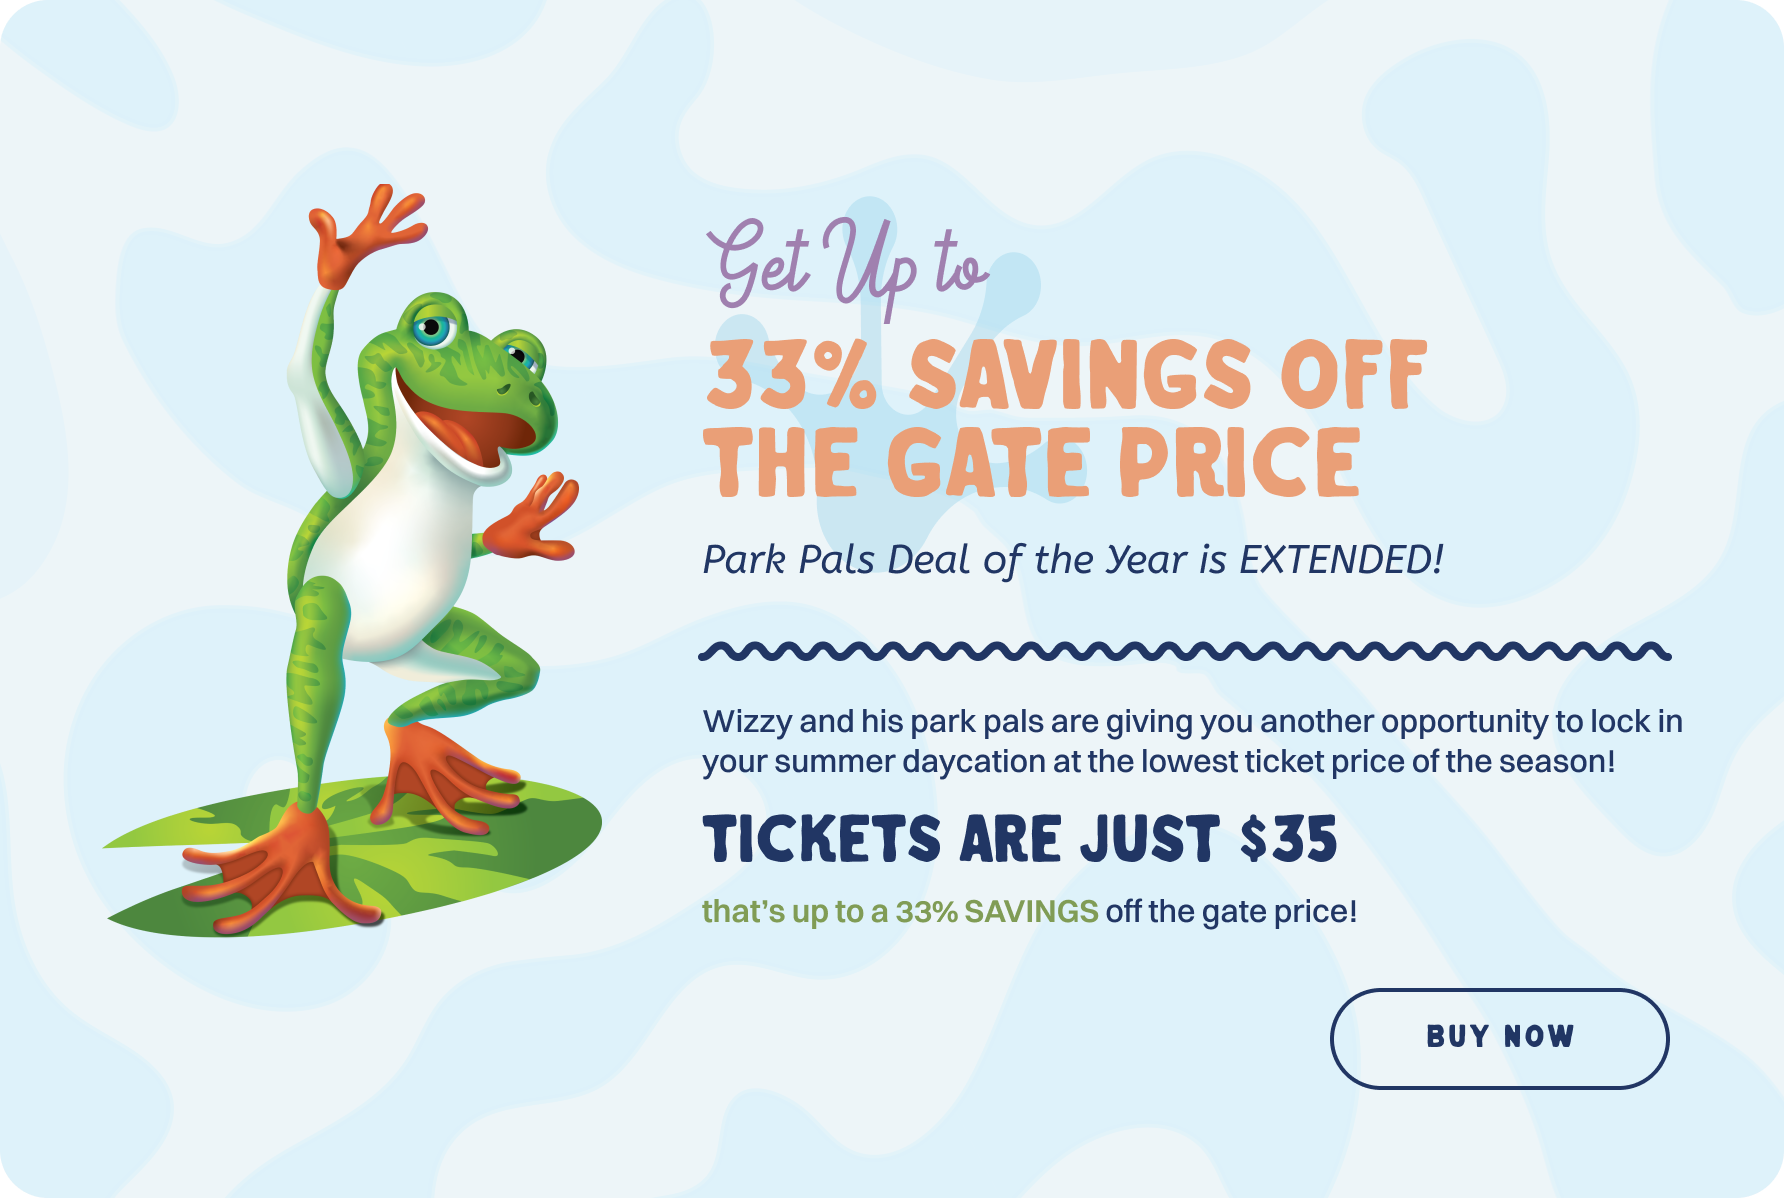 Park Pals Deal of the Year is Extended!